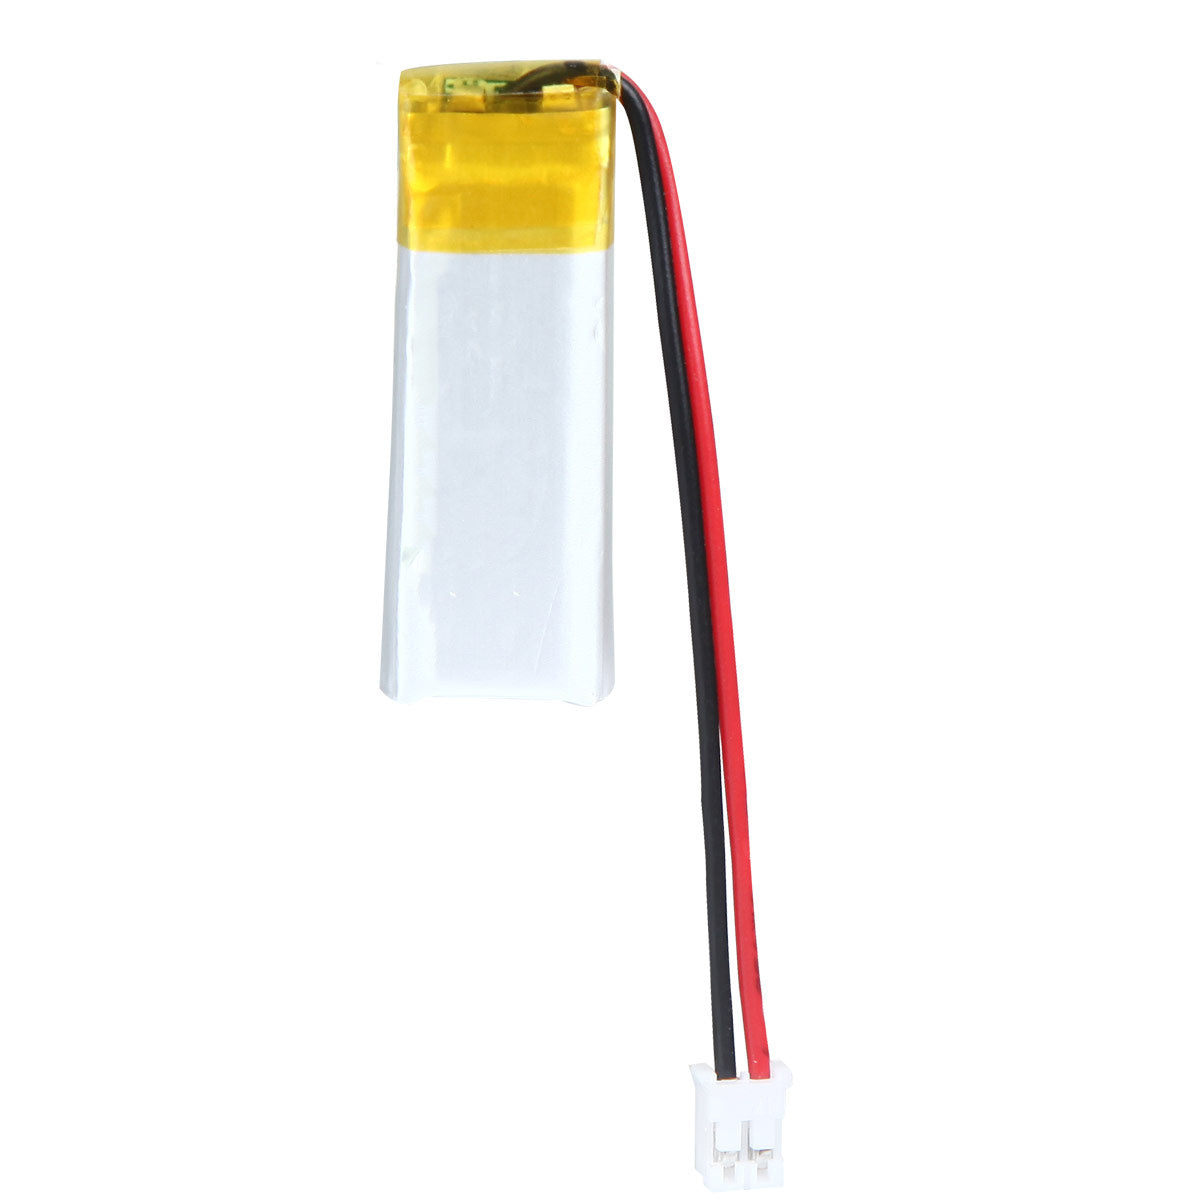 YDL 3.7V 100mAh 401129 Rechargeable Polymer Lithium-Ion Battery